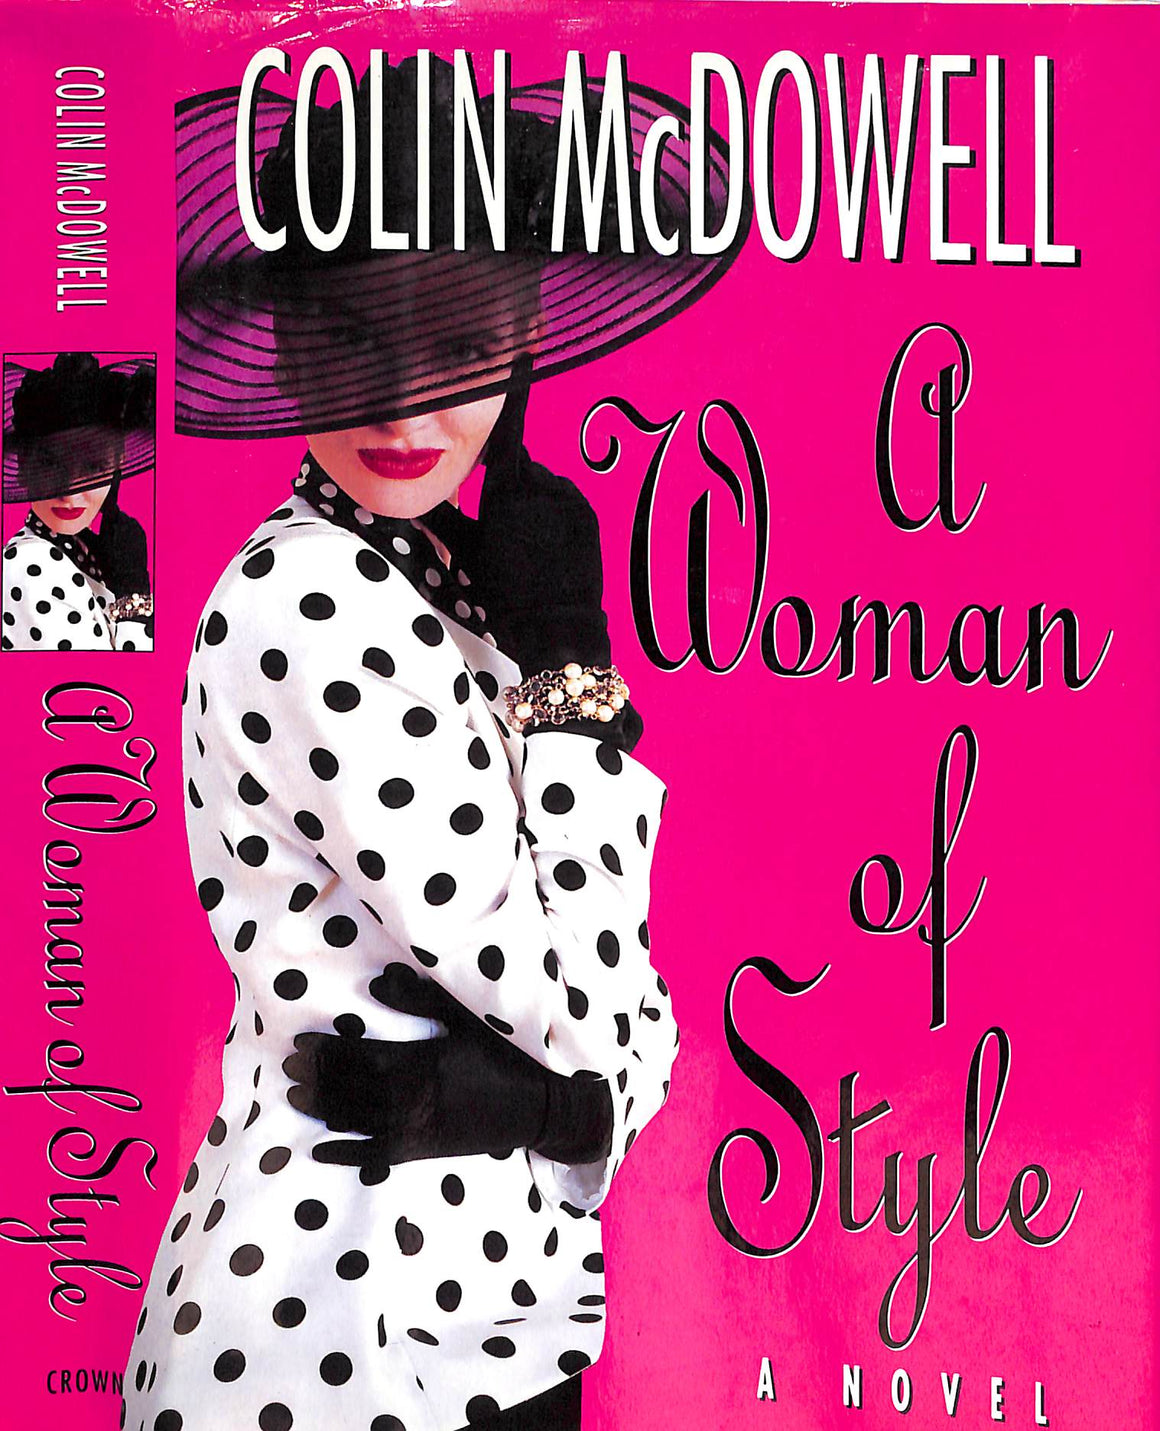 "A Woman Of Style" 1992 MCDOWELL, Colin